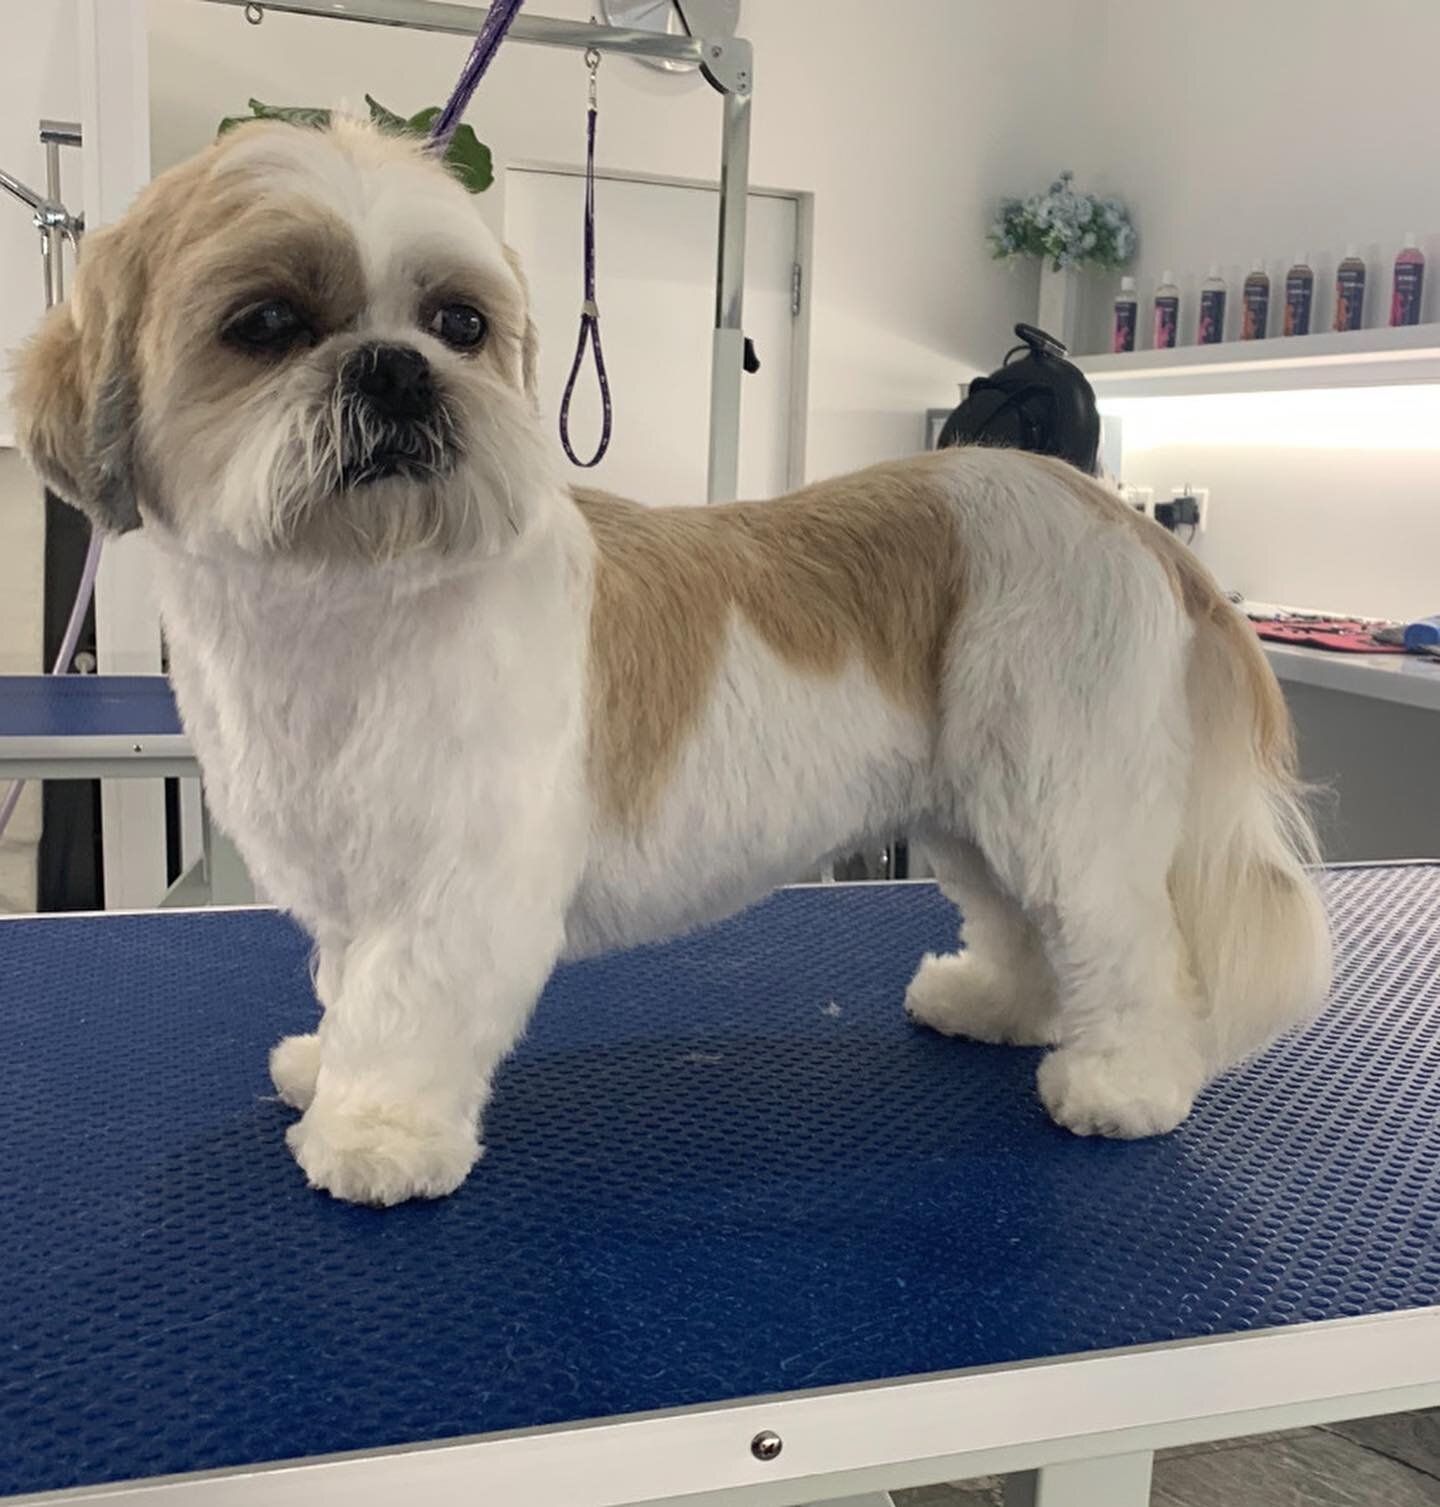 Nice short teddy style trim for Maisie the Shih Tzu 🐶 Swipe to see her before! ➡️ 
.
.
.
.
.
#petspaessex #brentwood #essex #doggrooming #doggroomingofinstagram #dog #doggroomer #doggroominglife #doglover #shihtzu #shihtzusofinstagram #shihtzulovers